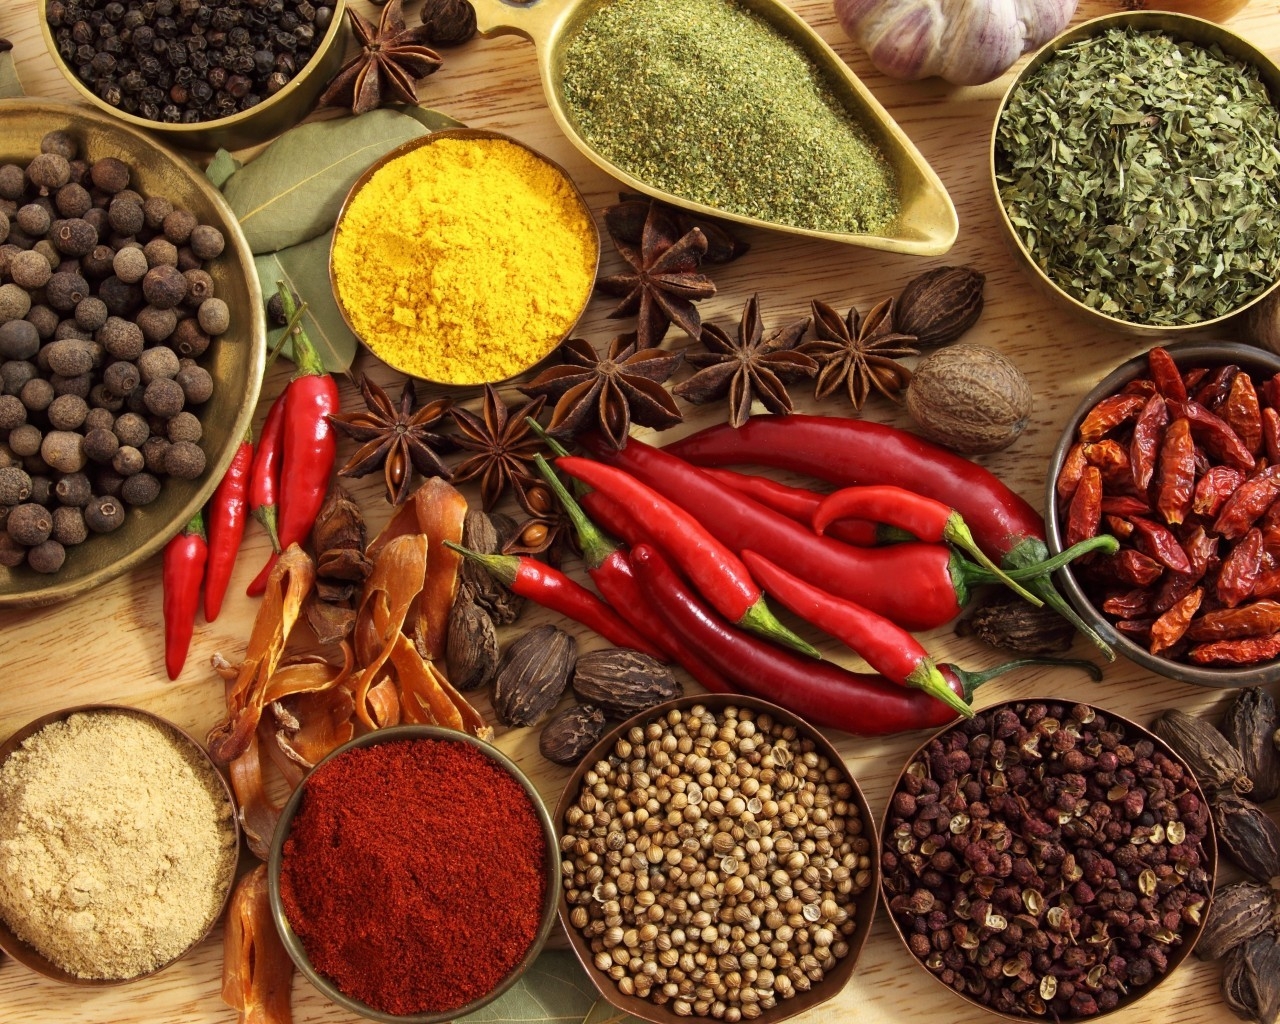 Spices Poster for 1280 x 1024 resolution